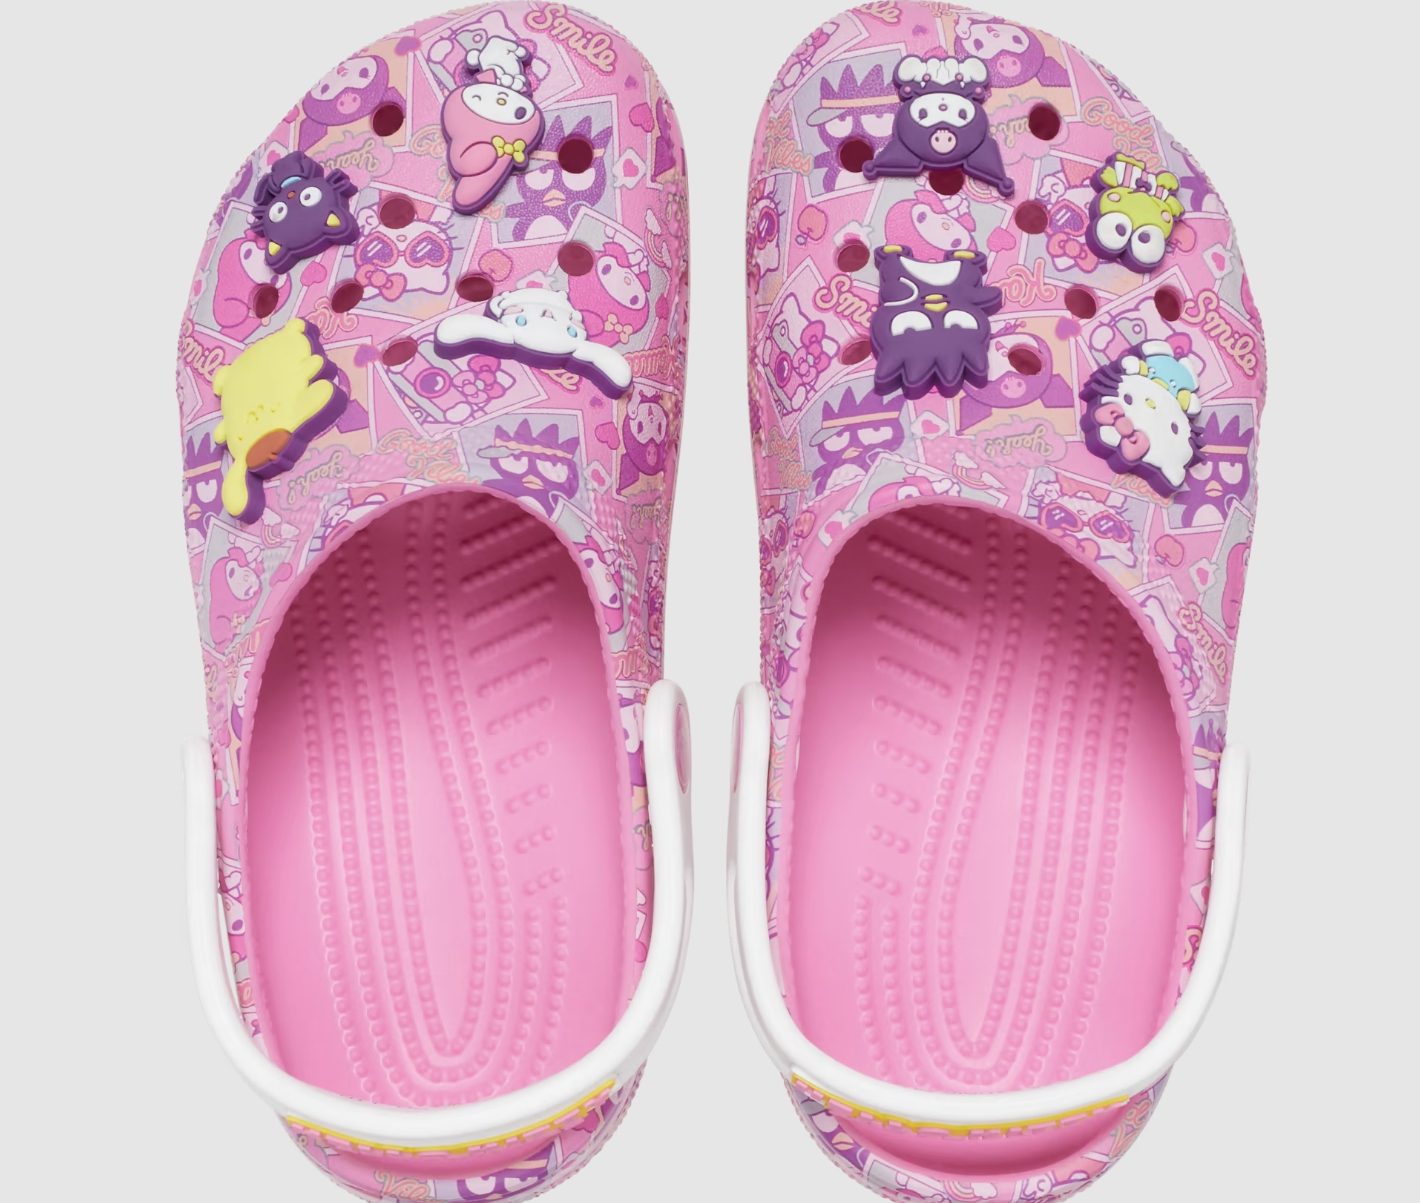 A pair of pink Crocs with Hello Kitty designs and charms on them